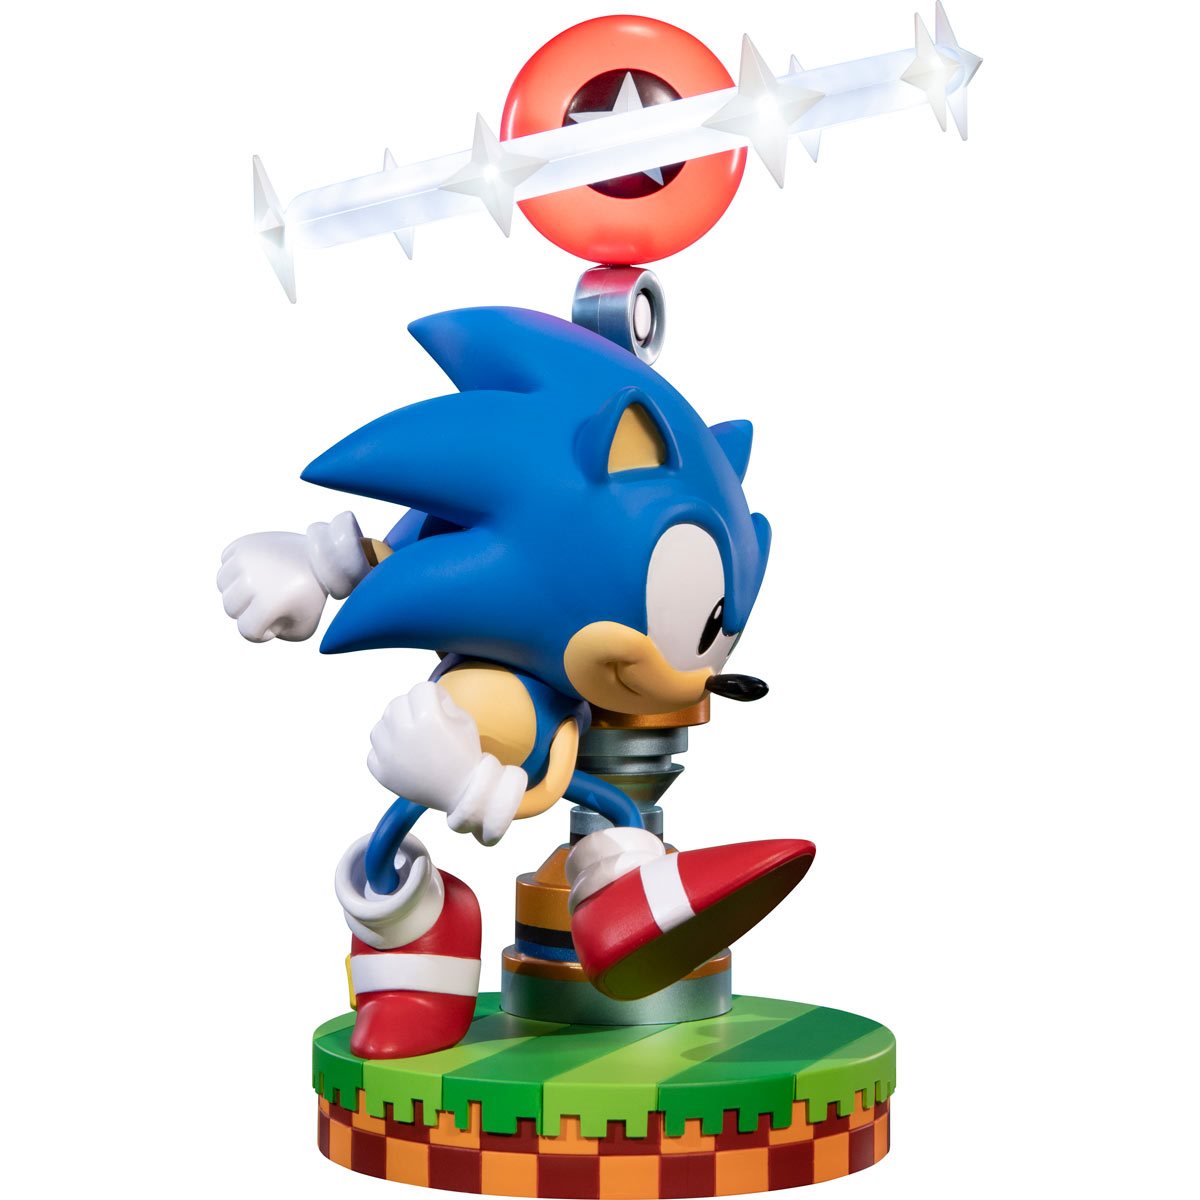 First4Figures Sonic the Hedgehog Classic Tails Statue Mint in Box